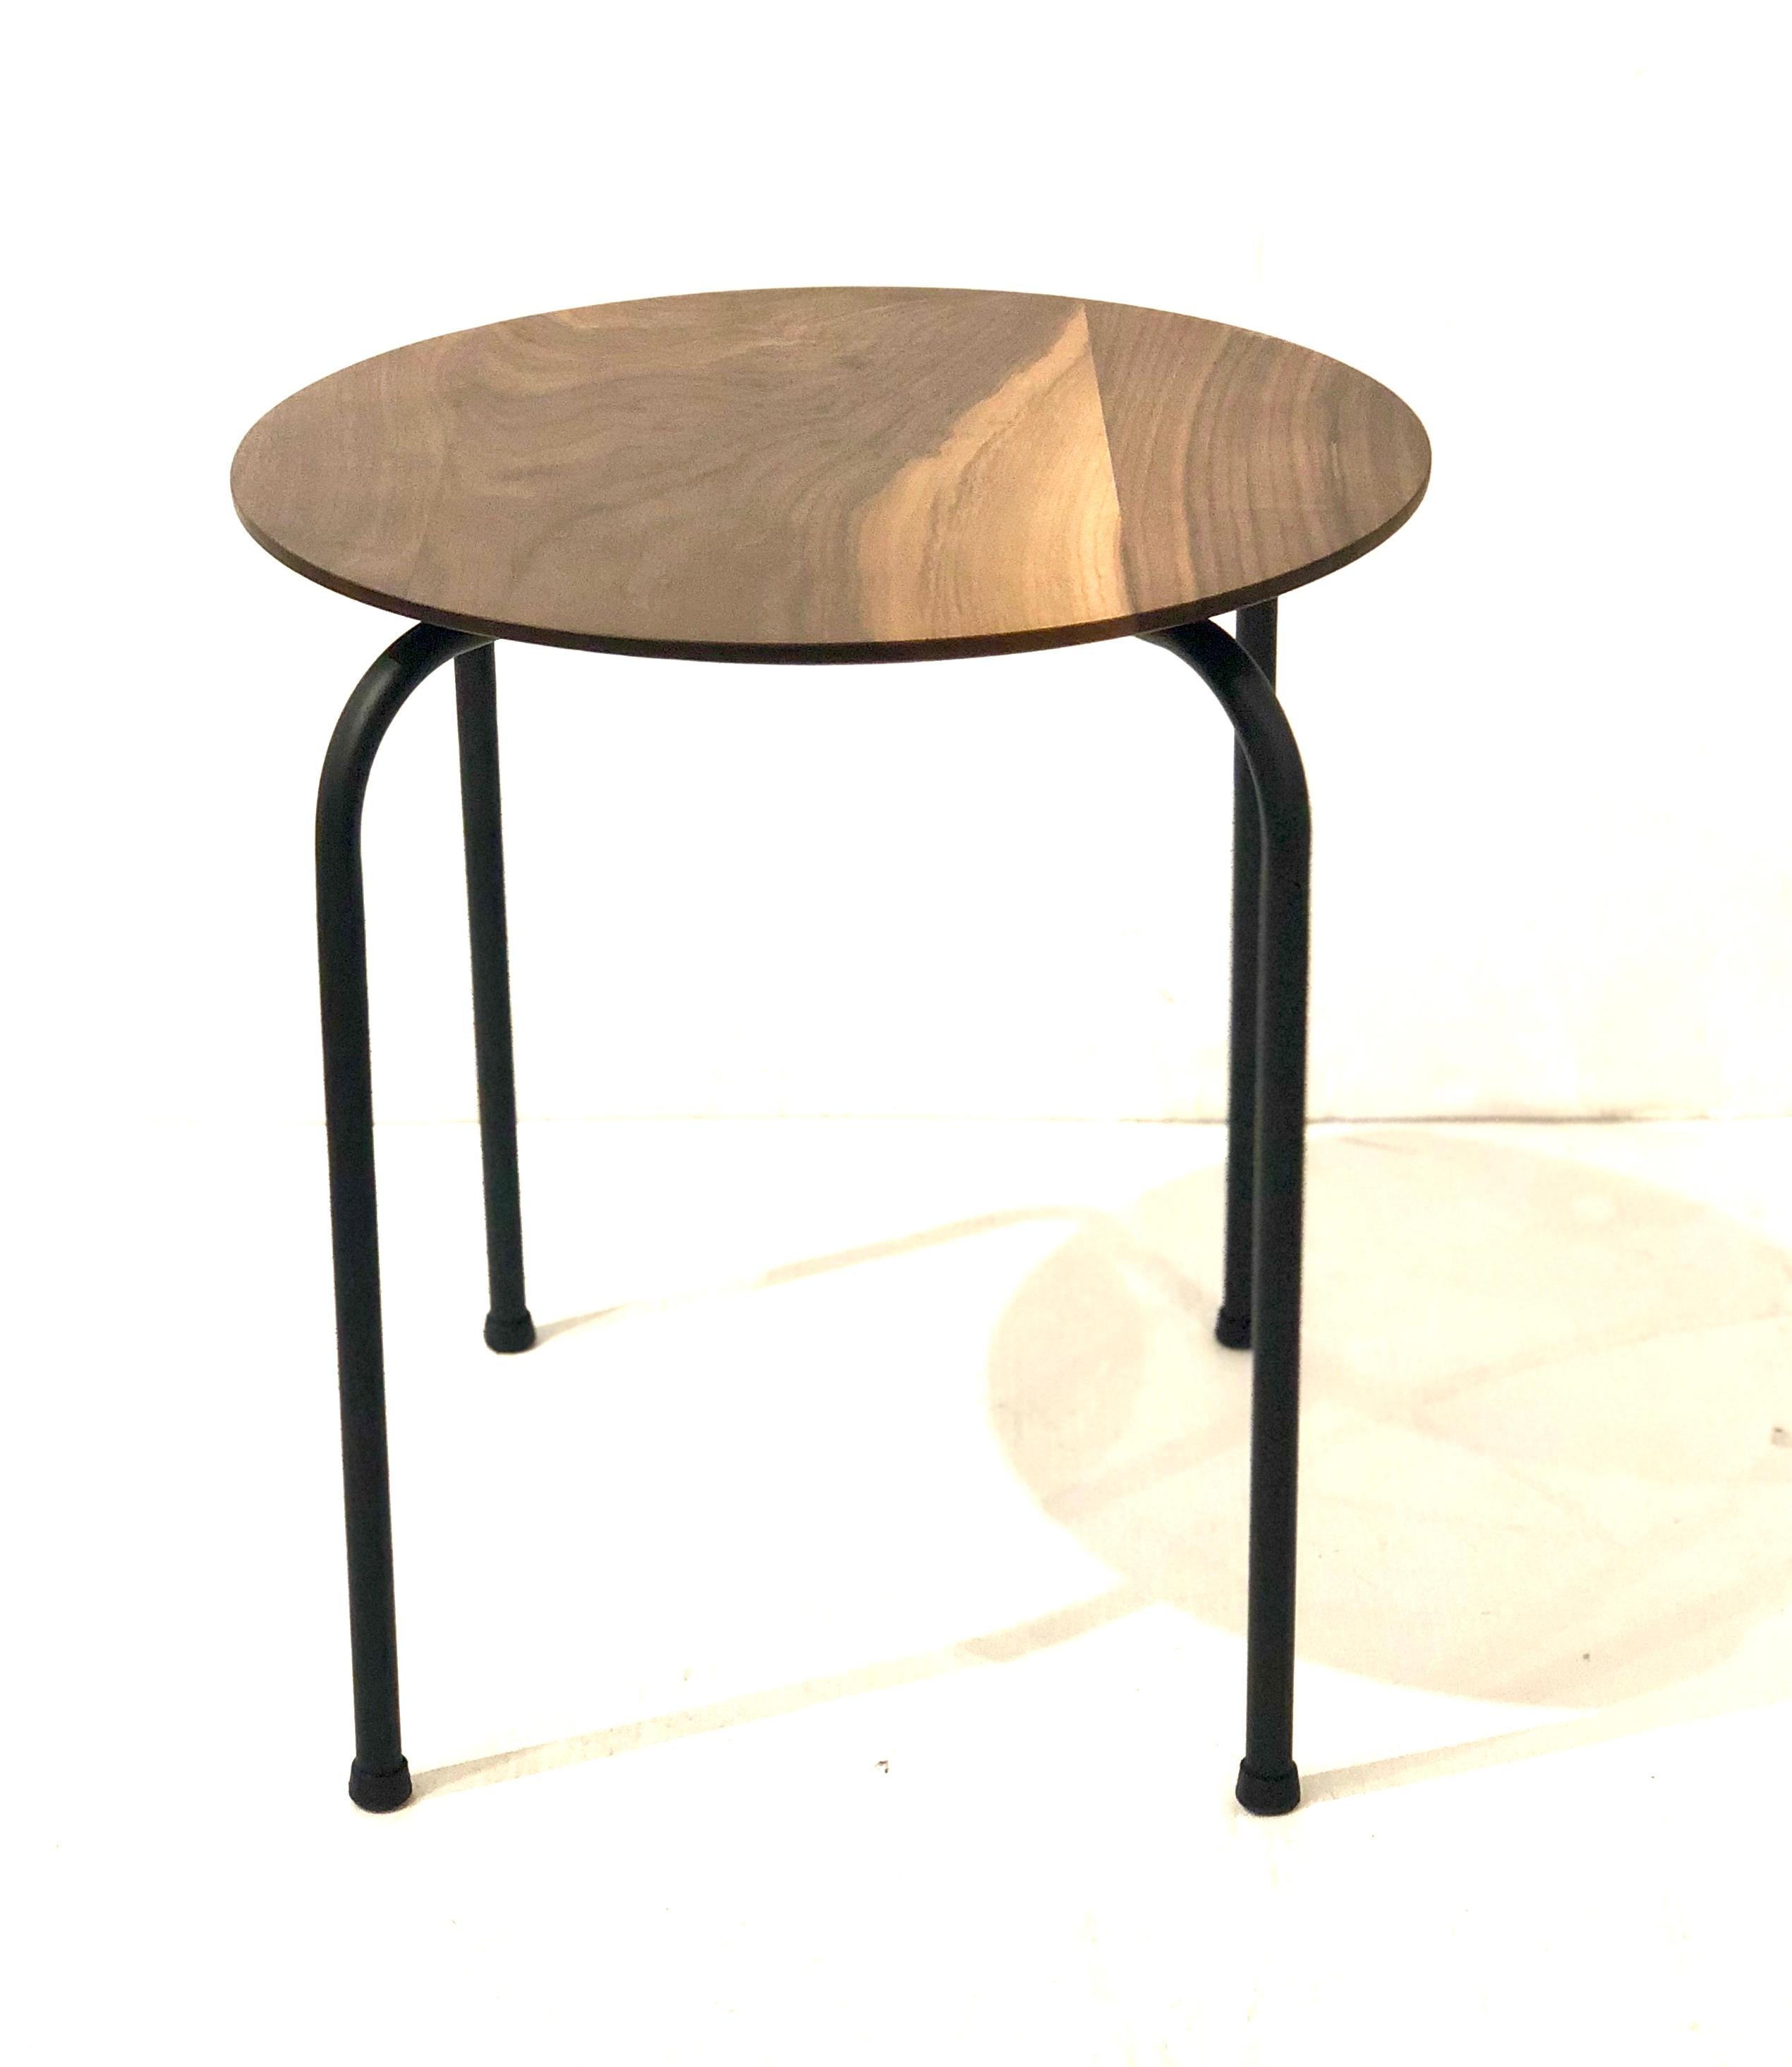 Mid-Century Modern American Black Walnut Cocktail Table or Stool with Black Metal Base